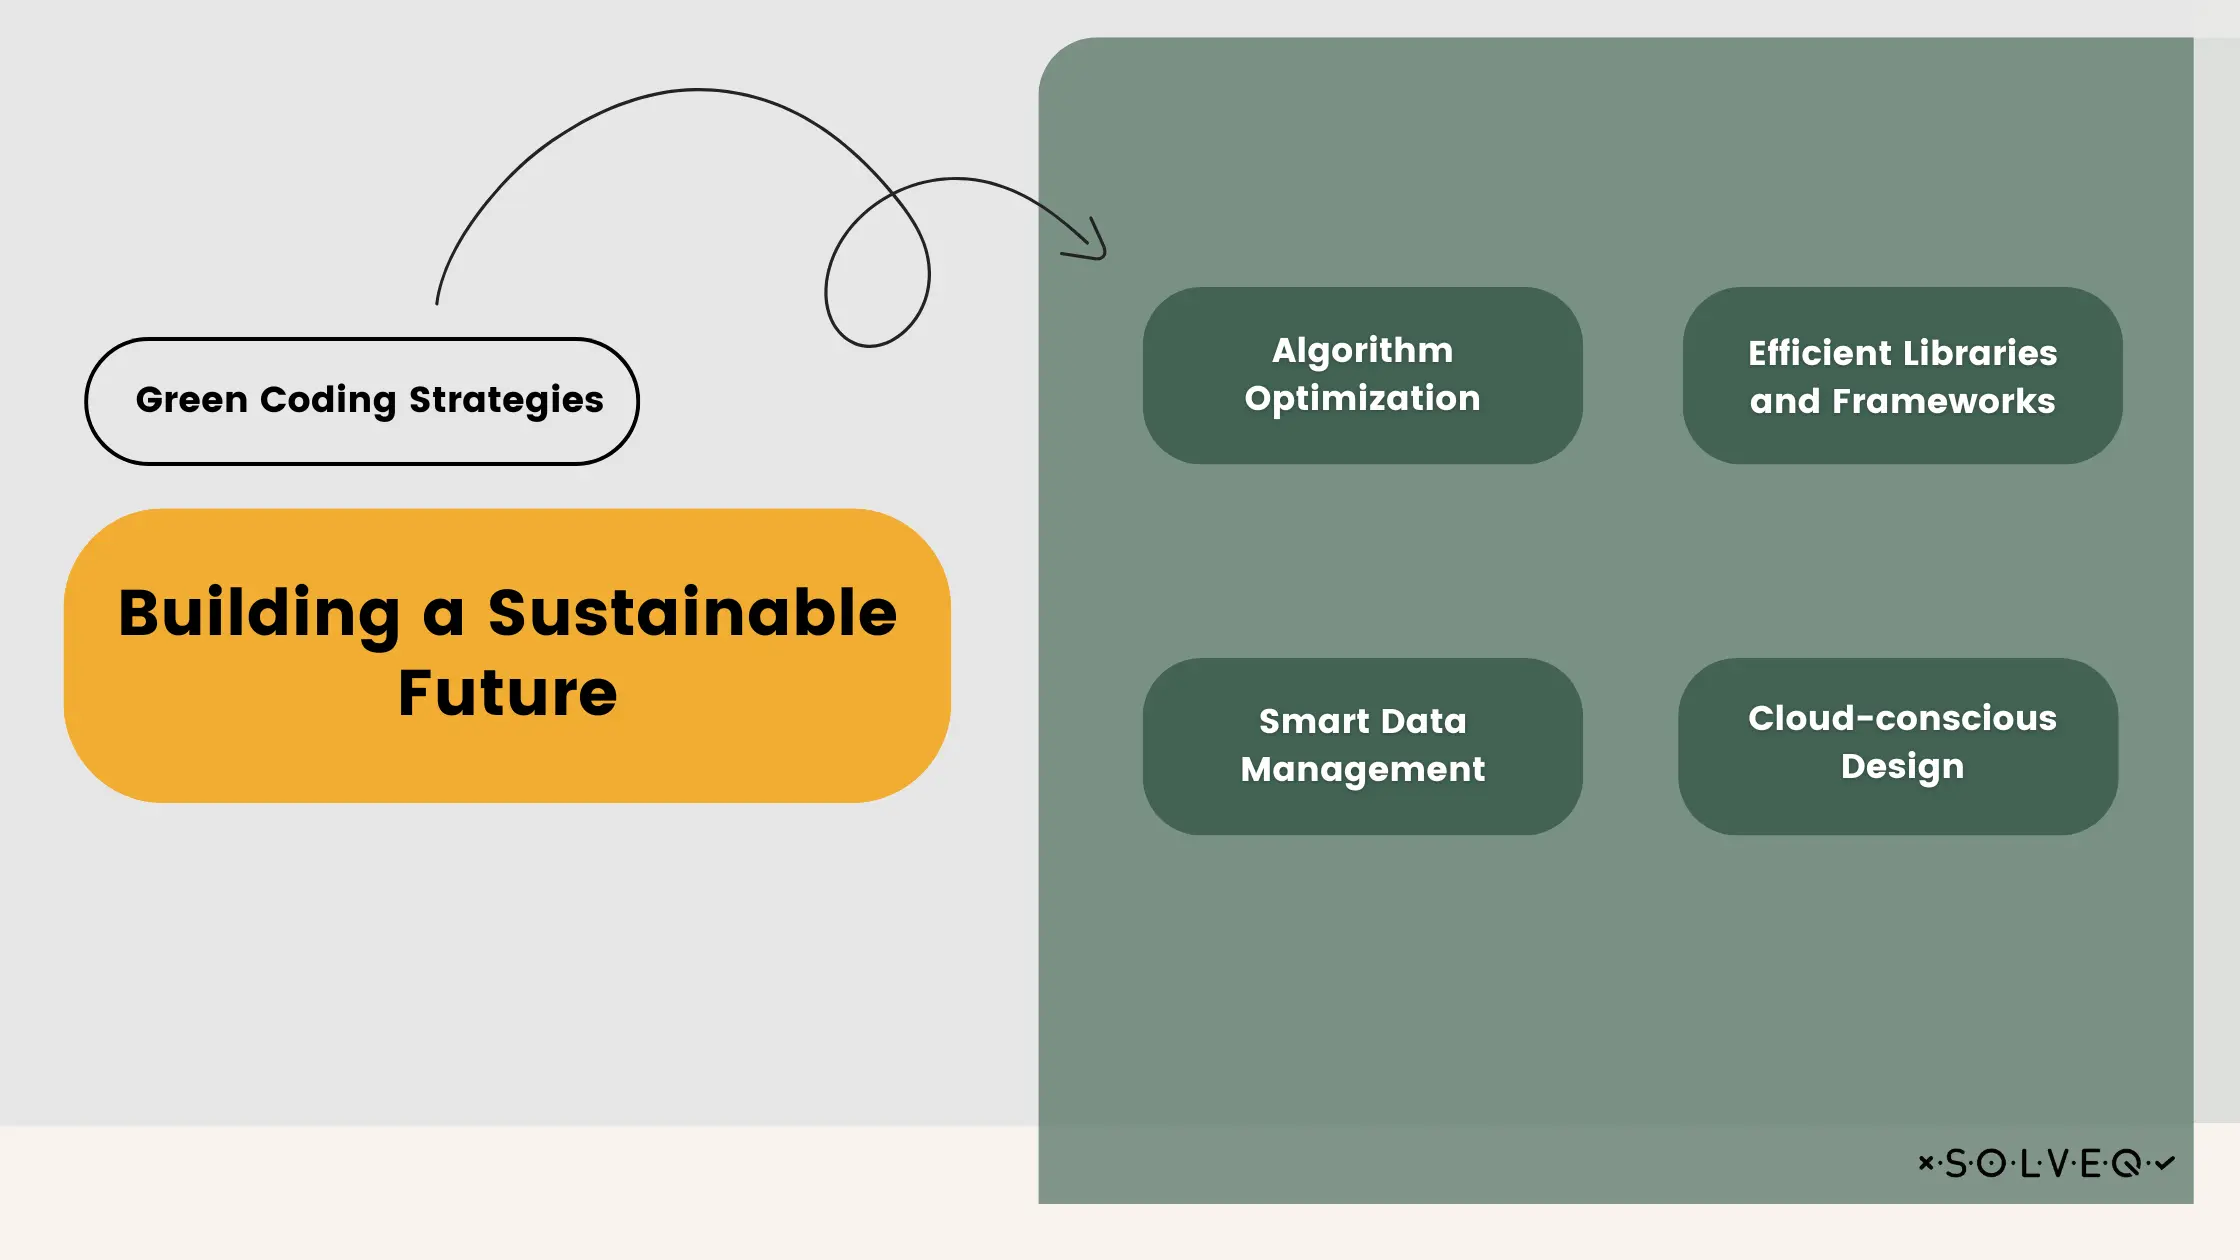 Green Coding Strategies: Building a Sustainable Future